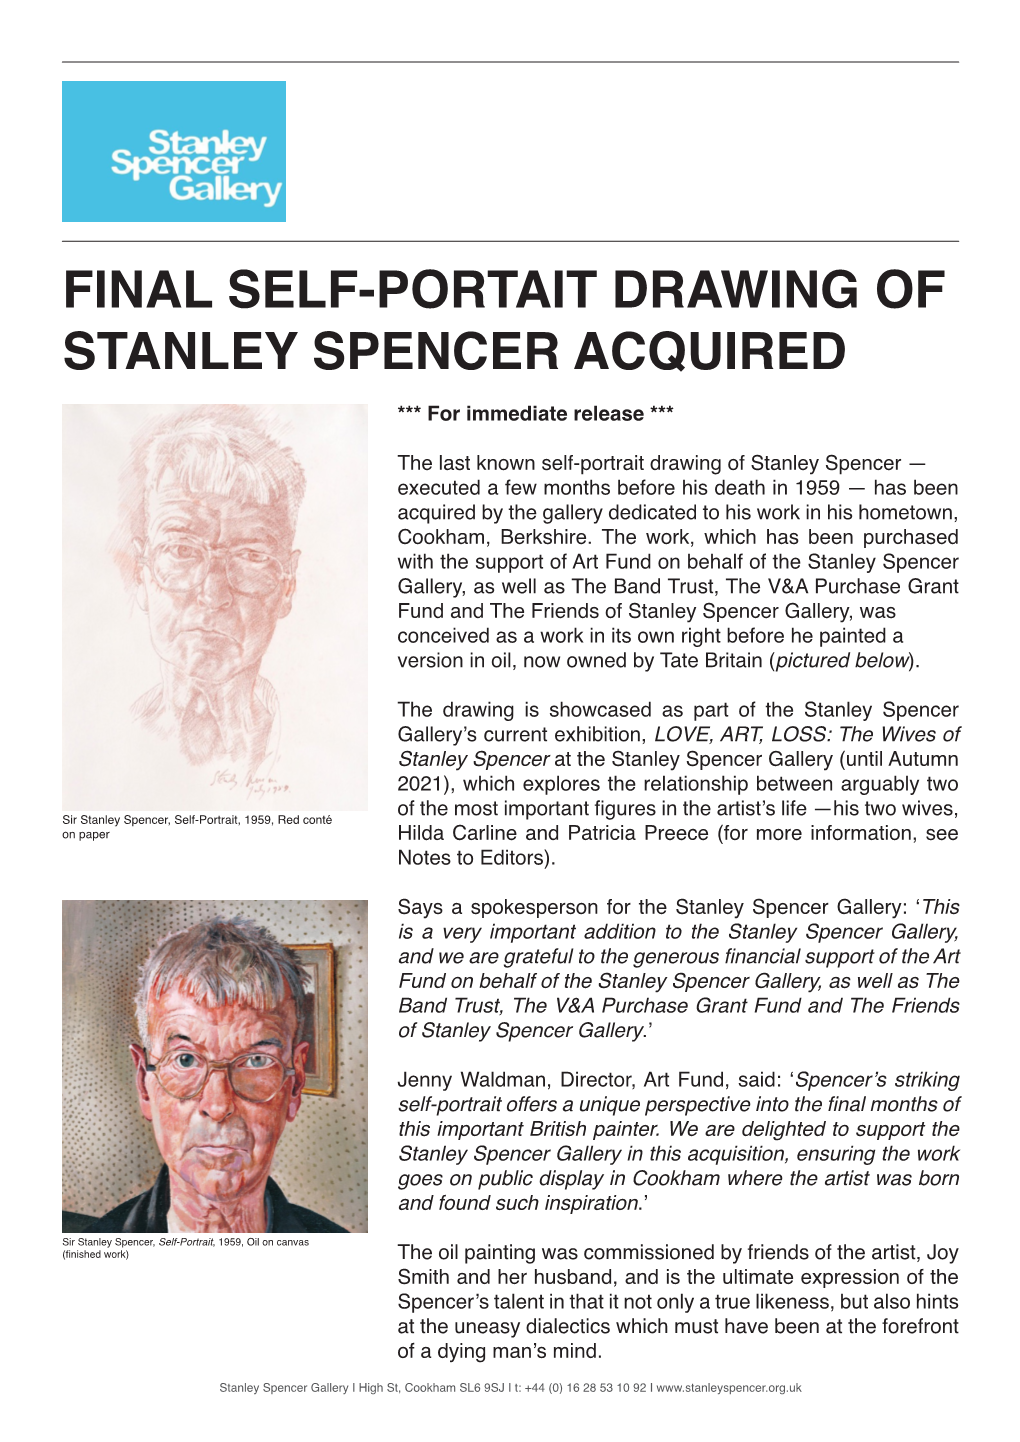 FINAL SELF-PORTAIT DRAWING of STANLEY SPENCER ACQUIRED *** for Immediate Release ***